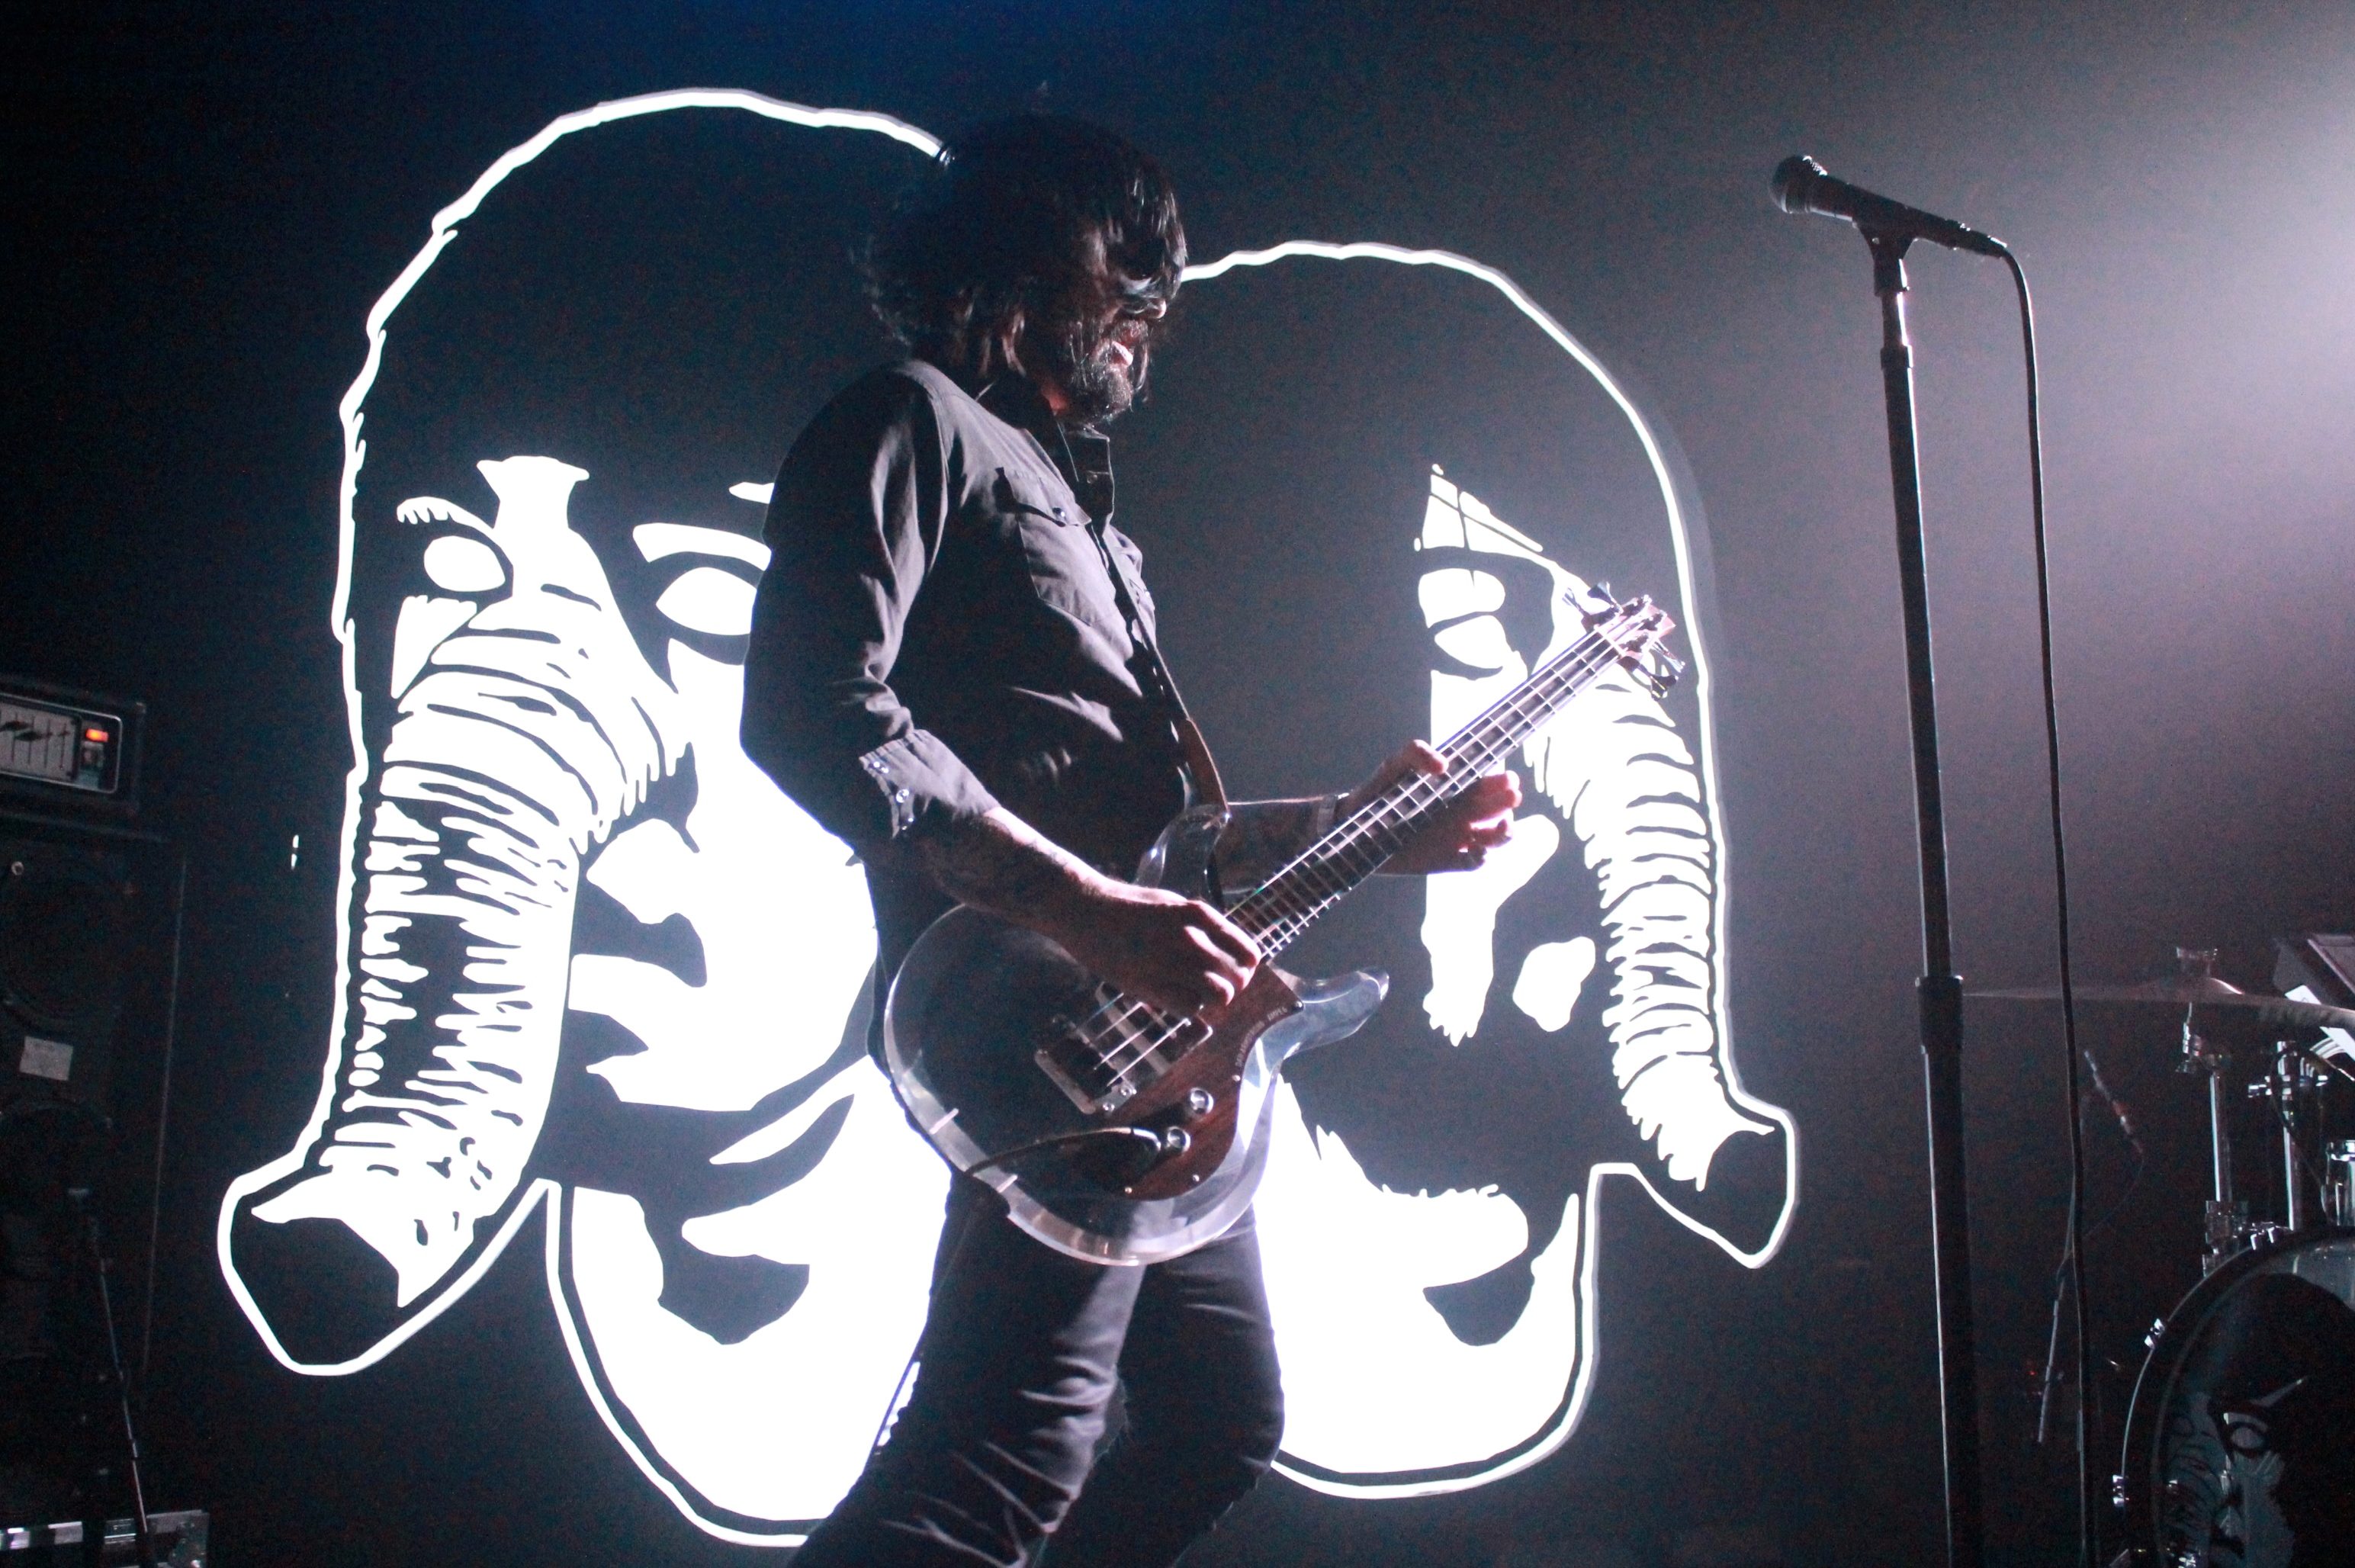 Death From Above 1979 Debut Two Remixes of New Track “Free Animal” - mxdwn  Music